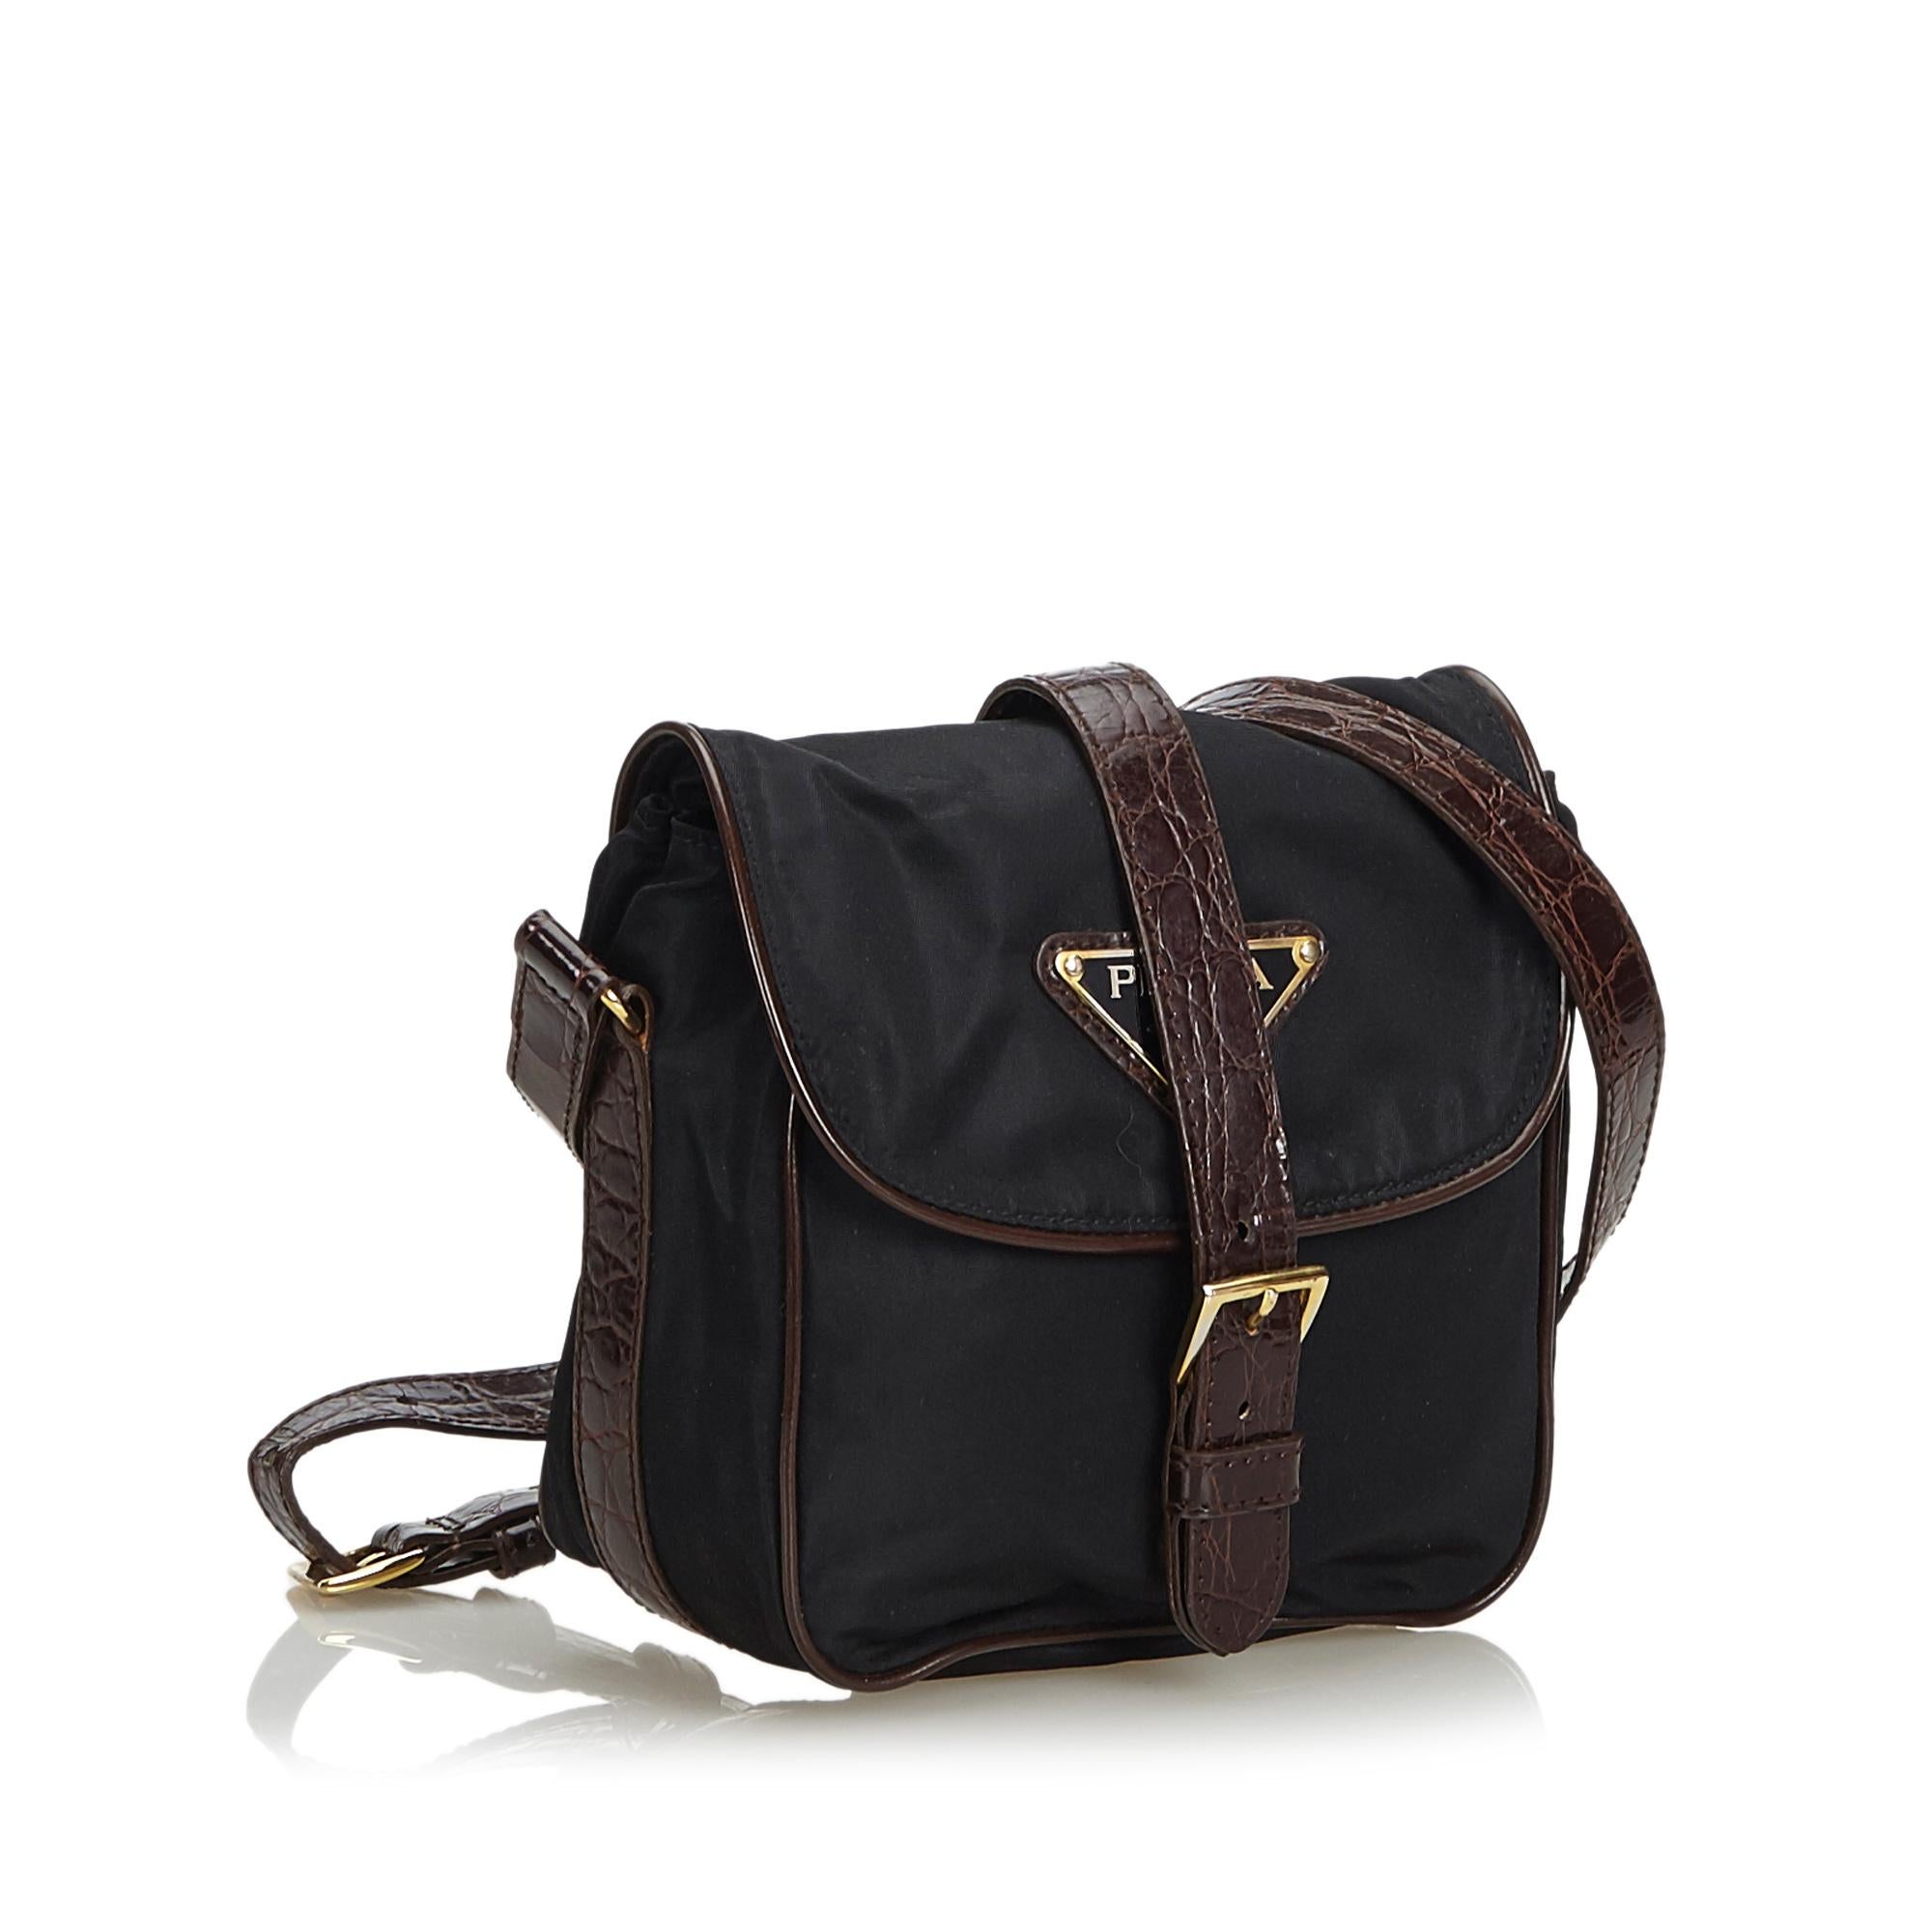 This crossbody bag features a nylon body, a flat leather strap, a front flap with a leather top buckle strap, and an interior zip pocket. It carries as B+ condition rating.

Inclusions: 
This item does not come with inclusions.

Dimensions:
Length: